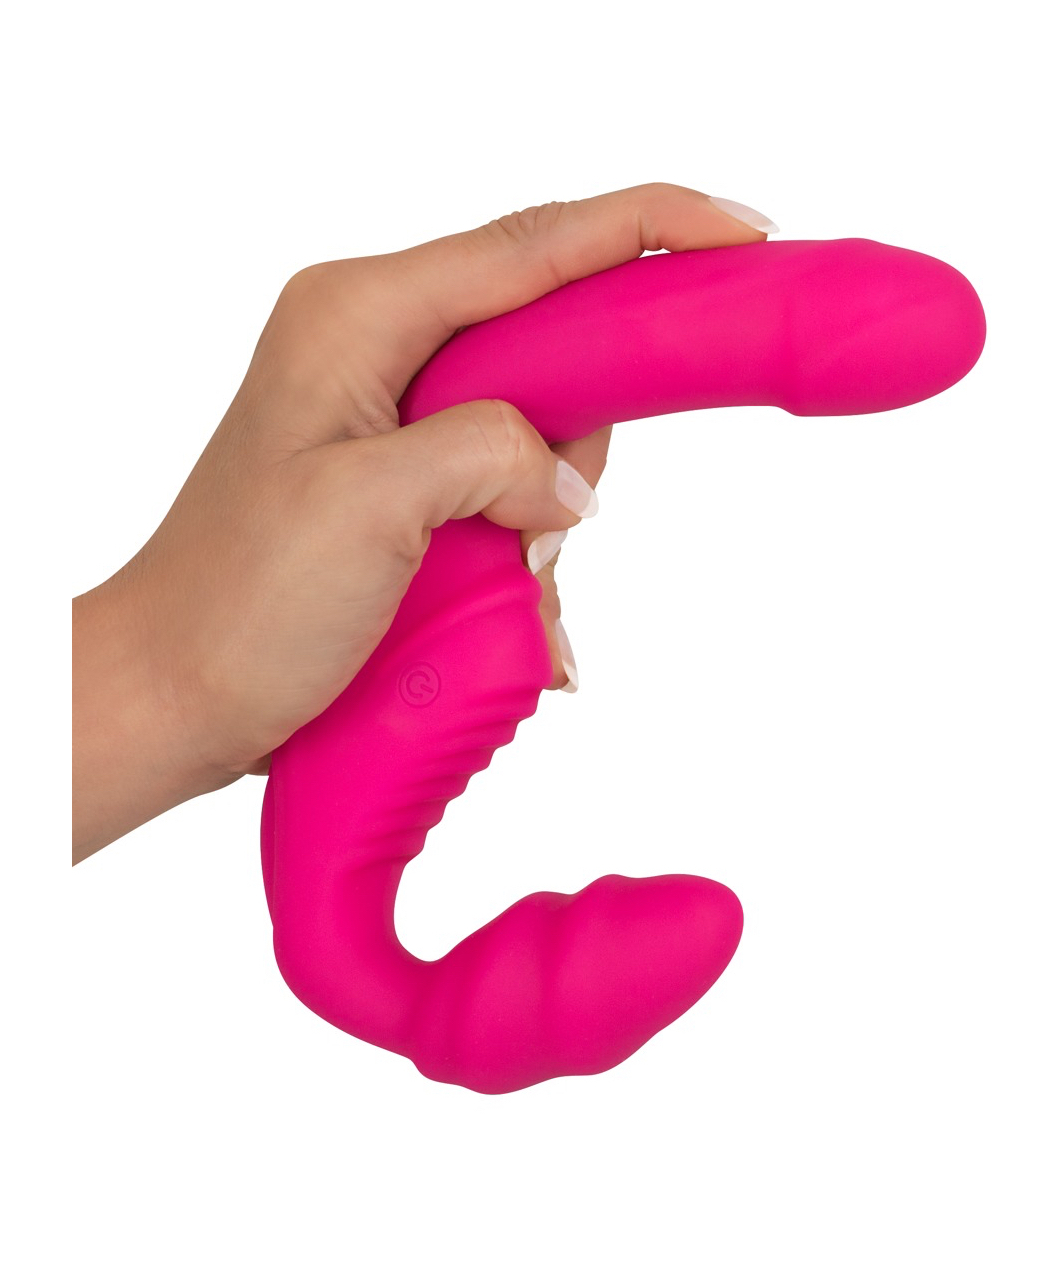 You2Toys Double Teaser Rechargeable